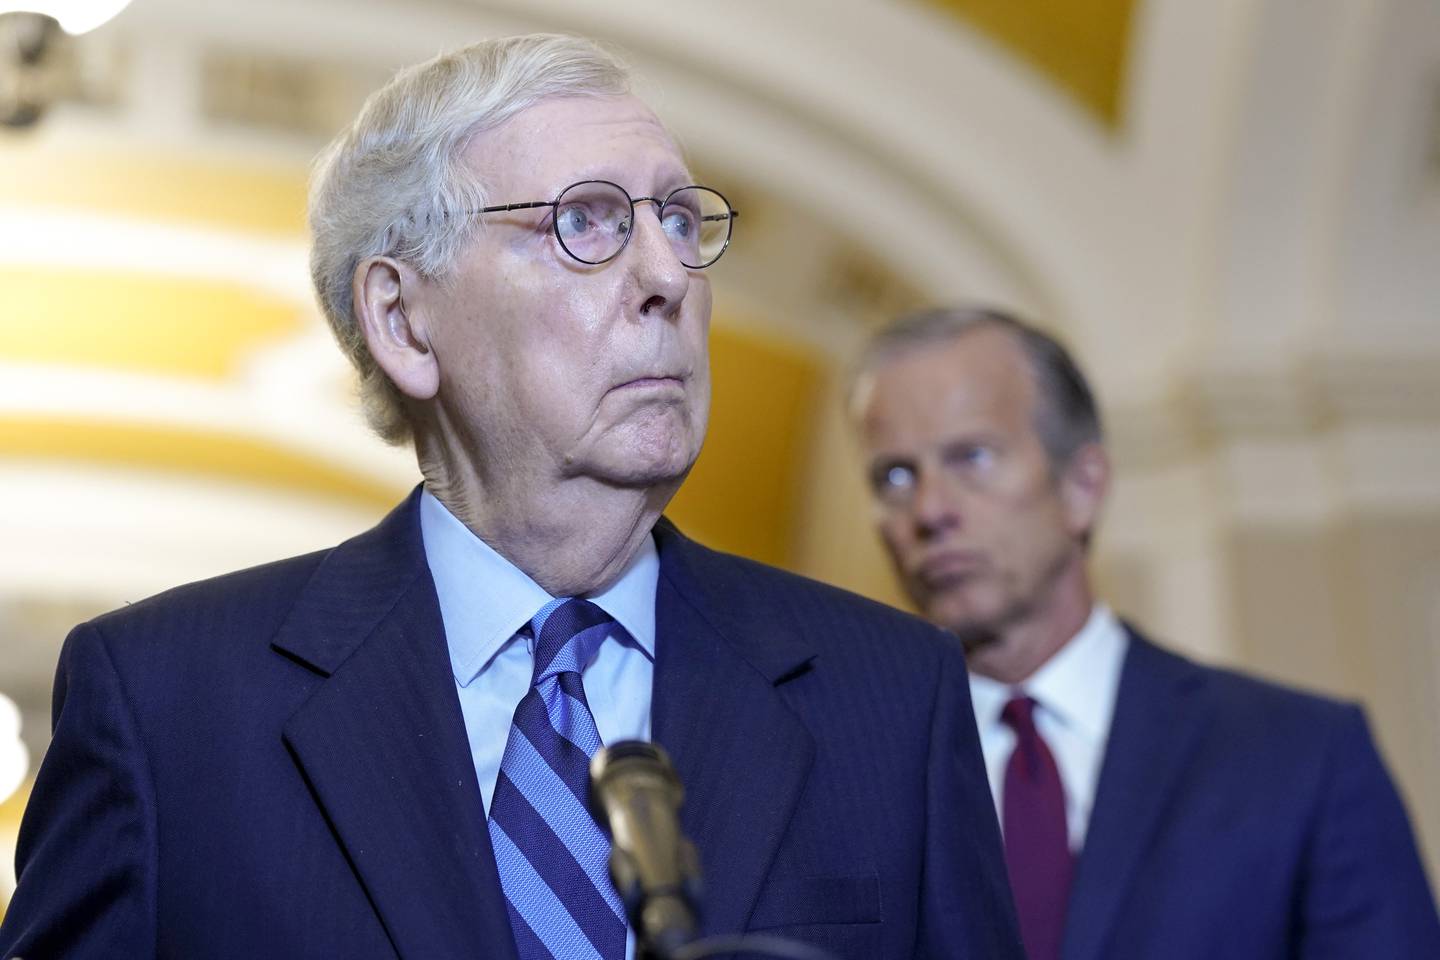 Senate Minority Leader Mitch McConnell, R-Ky., left, speaks as Sen. John Thune, R-S.D., right, listens as he speaks to reporters after a policy luncheon Wednesday, May 31, 2023, on Capitol Hill in Washington. (AP Photo/Mariam Zuhaib)